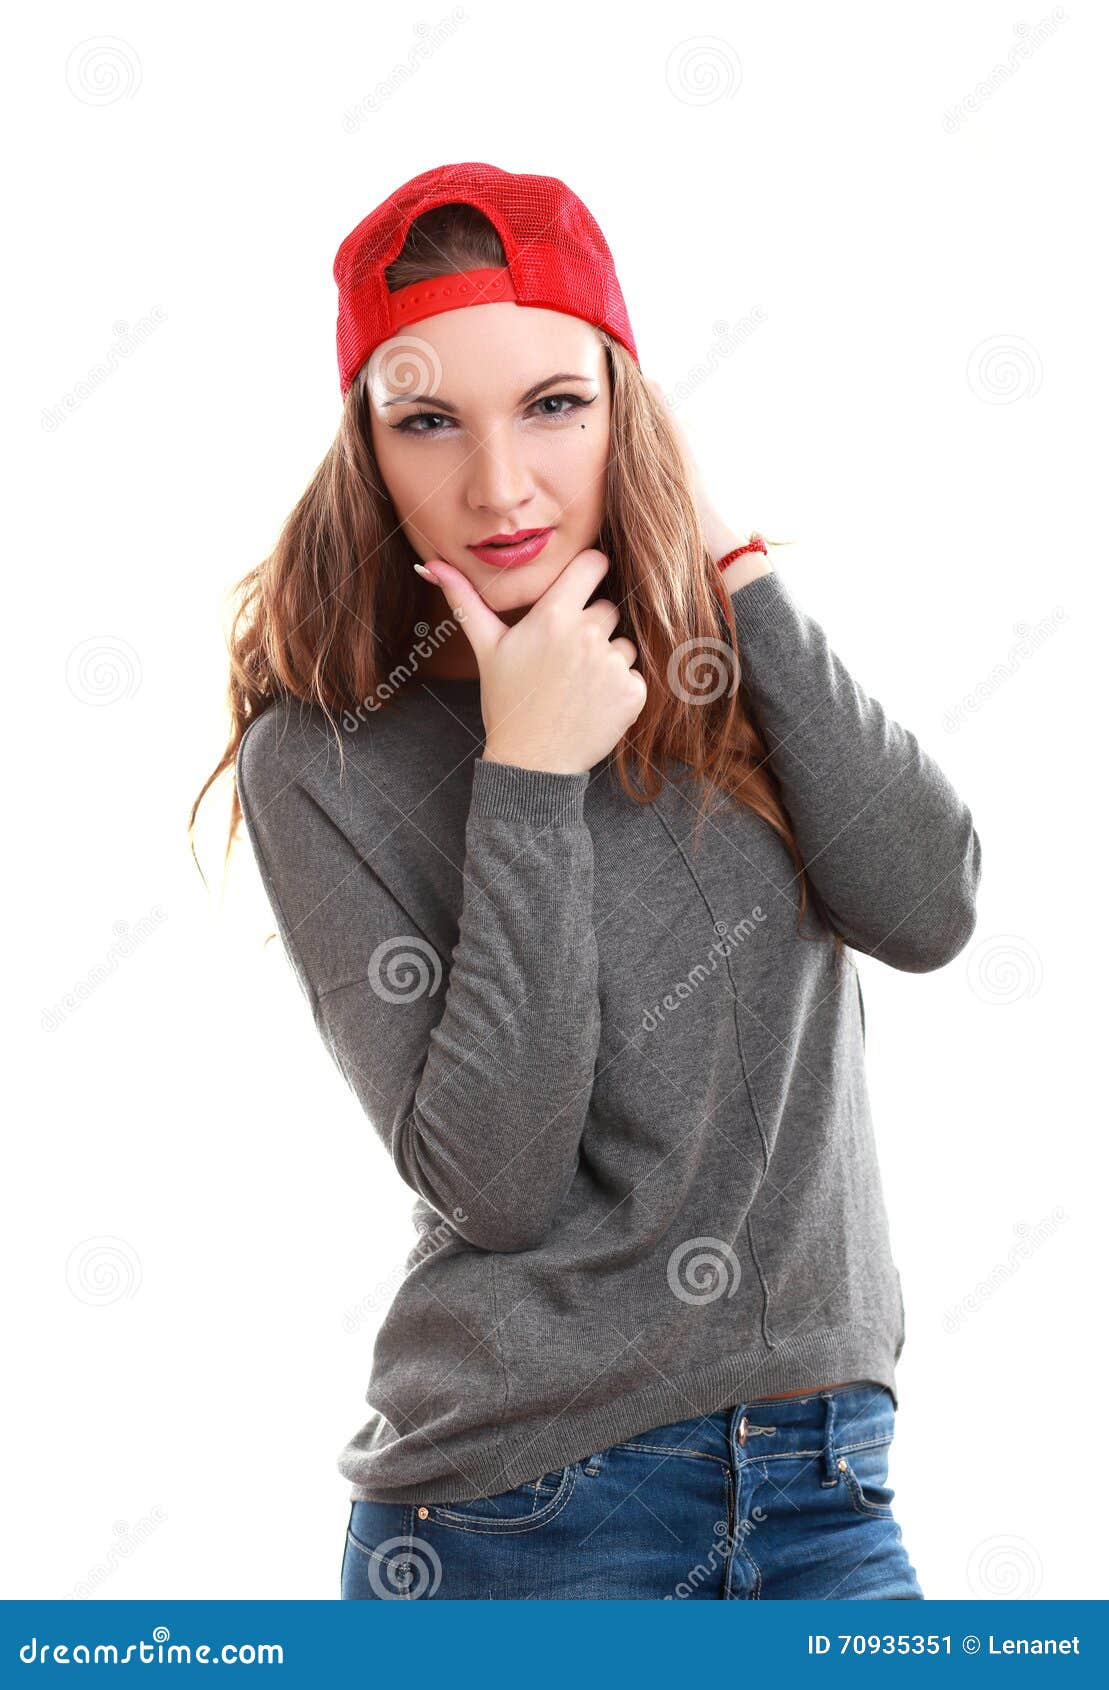 red baseball cap outfit